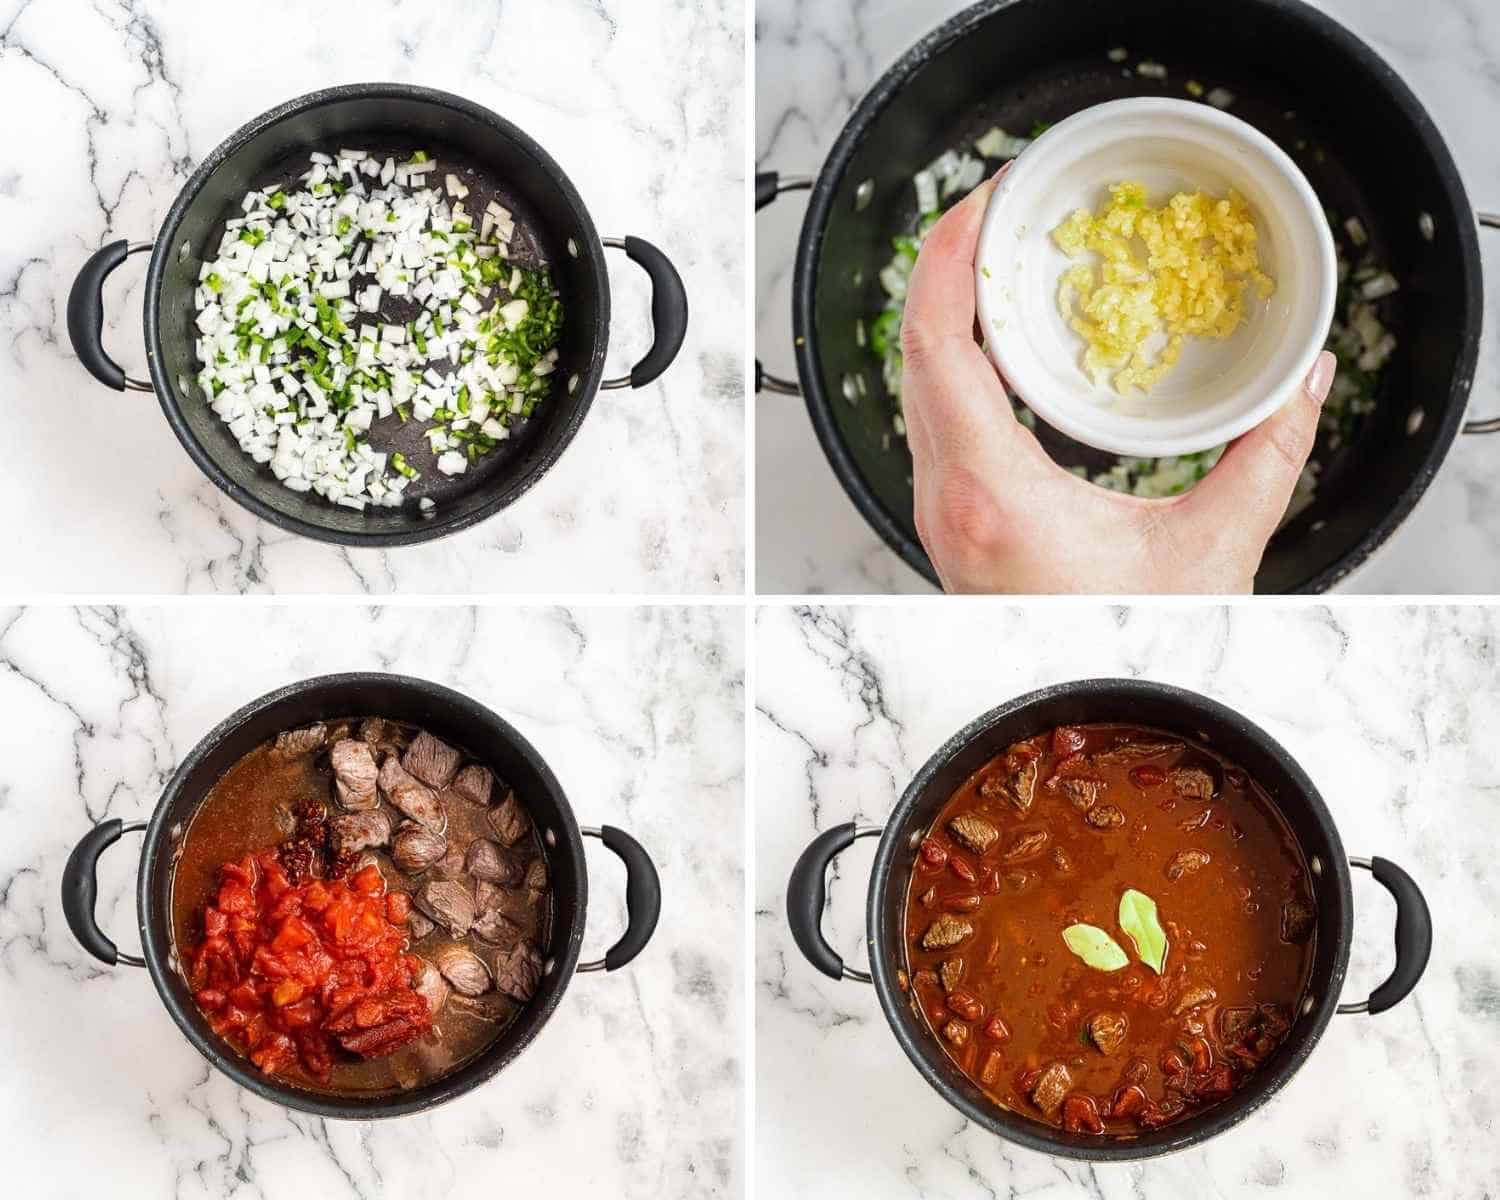 Collage of four images showing how to make texas chili